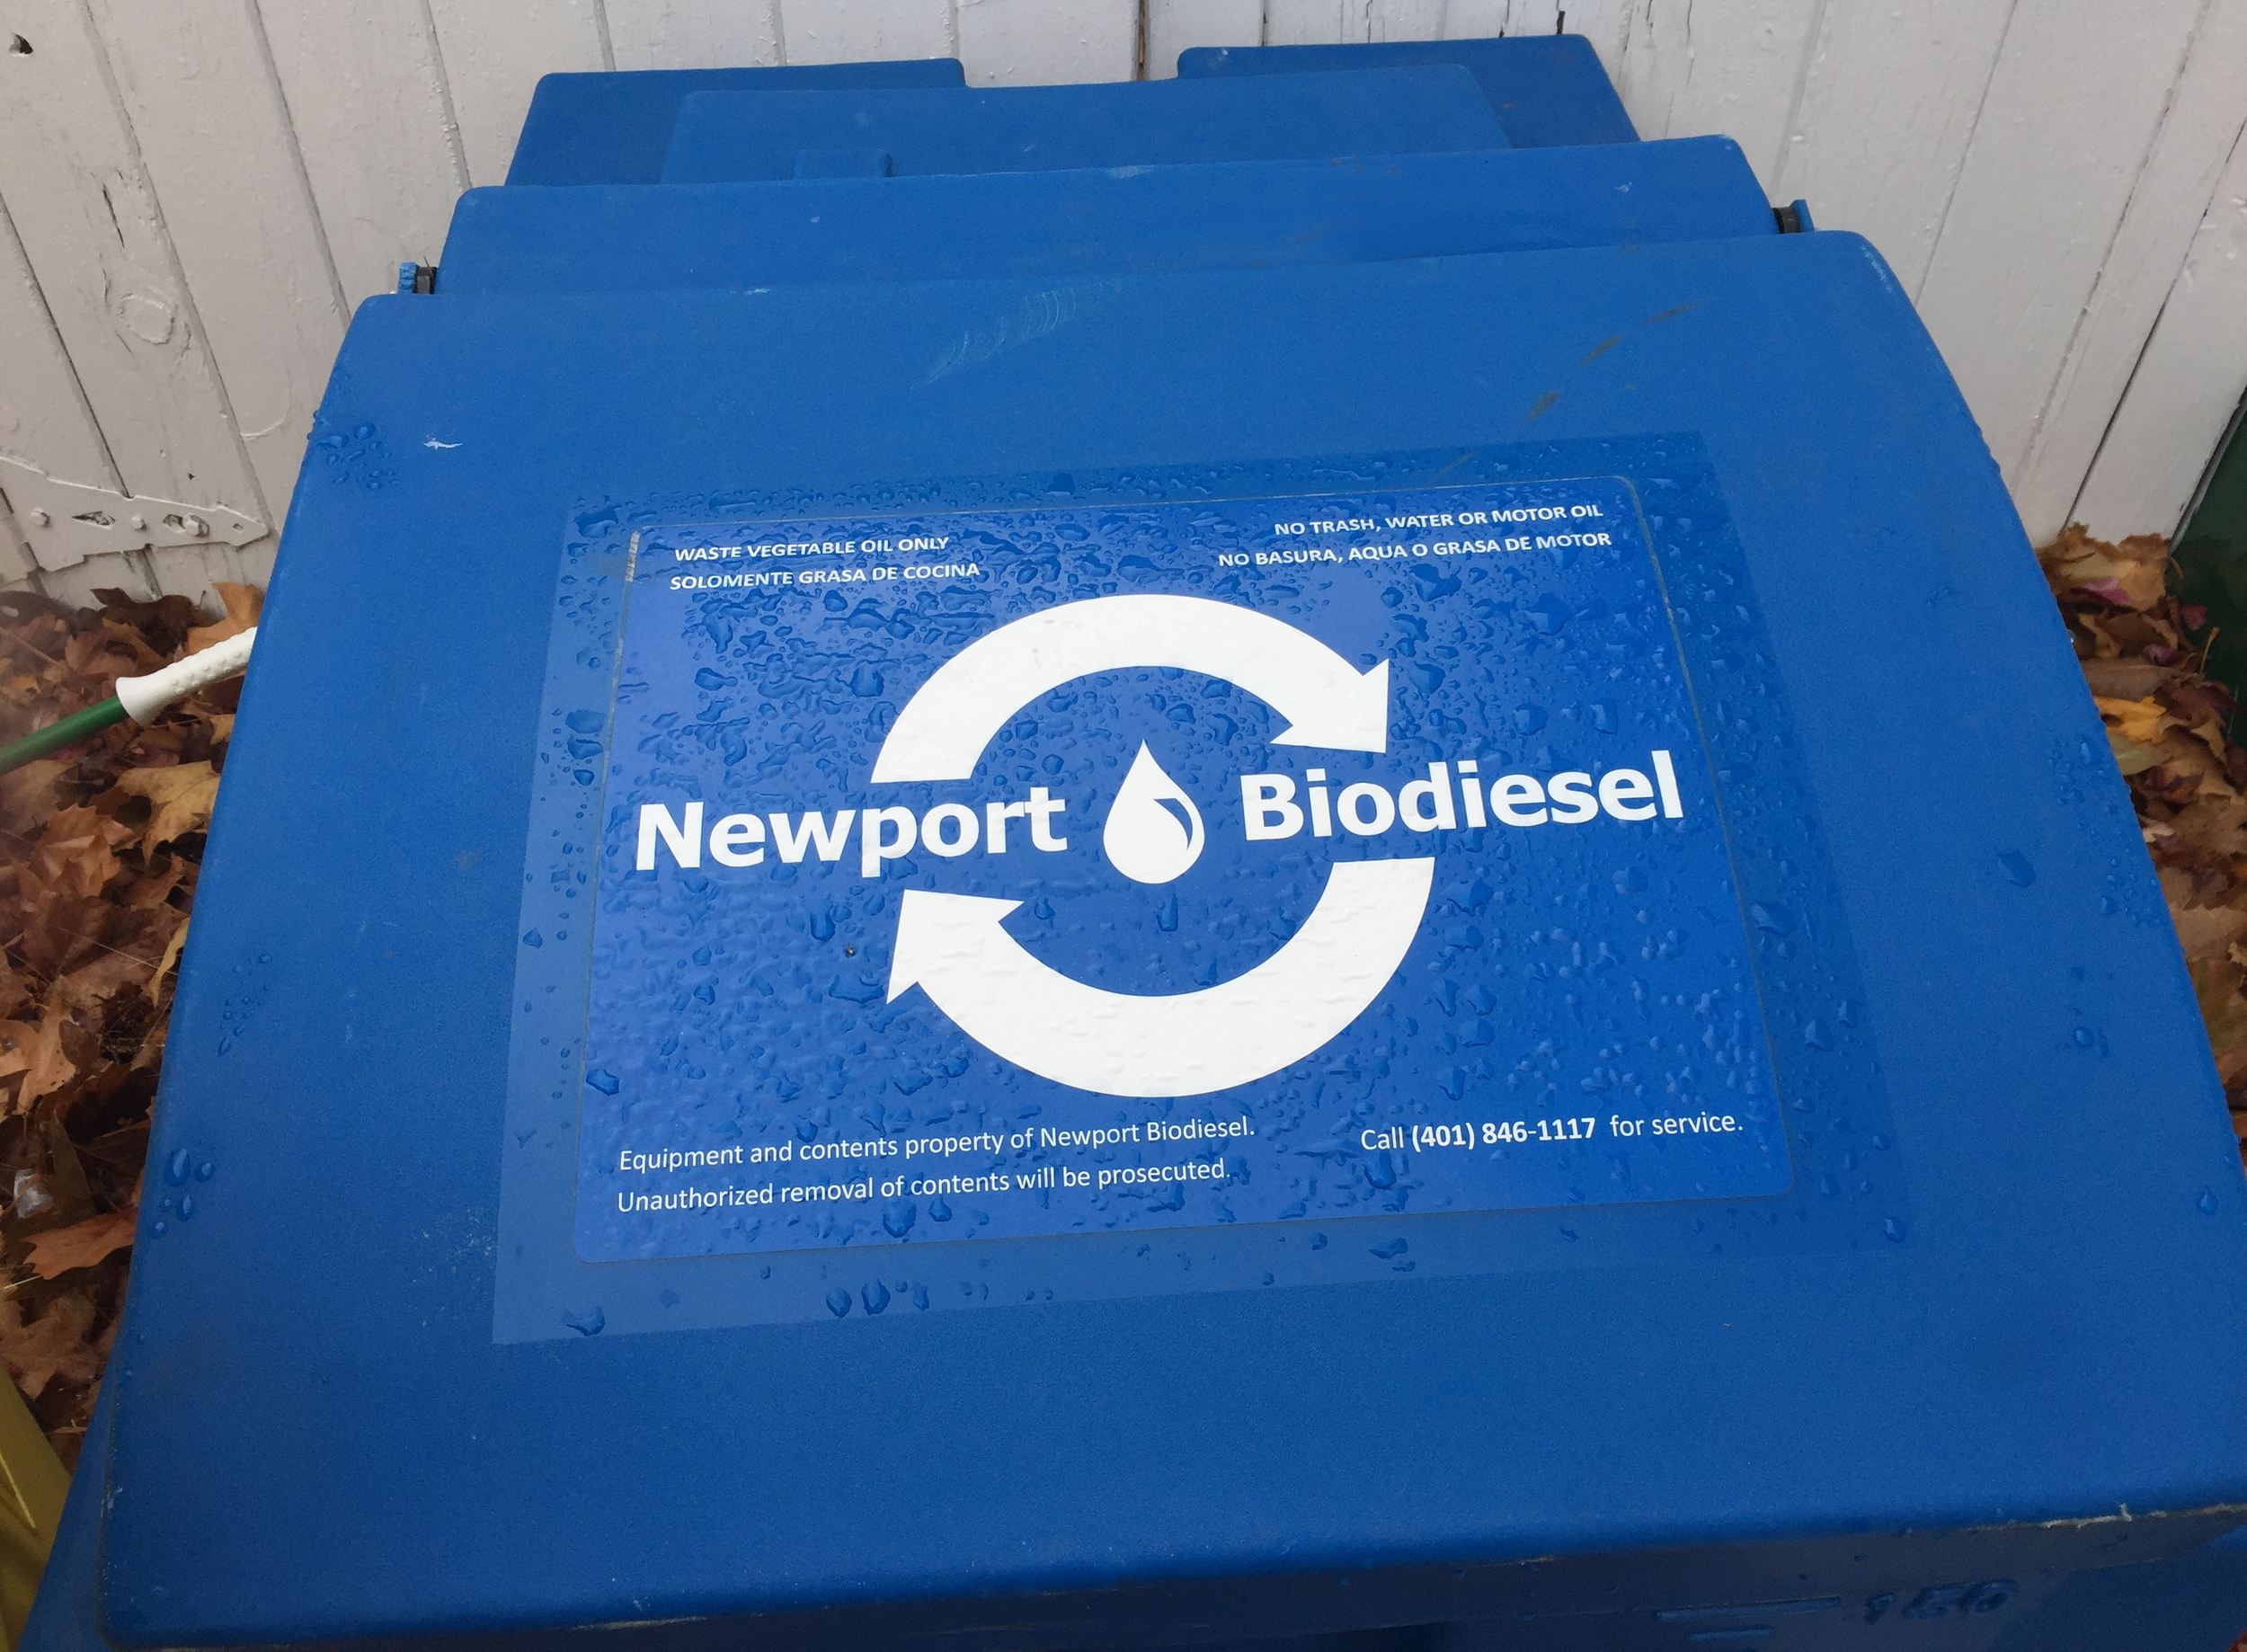  Blue vegetable oil recycling barrel located at WBNA Headquarters, 1560 Westminster. 